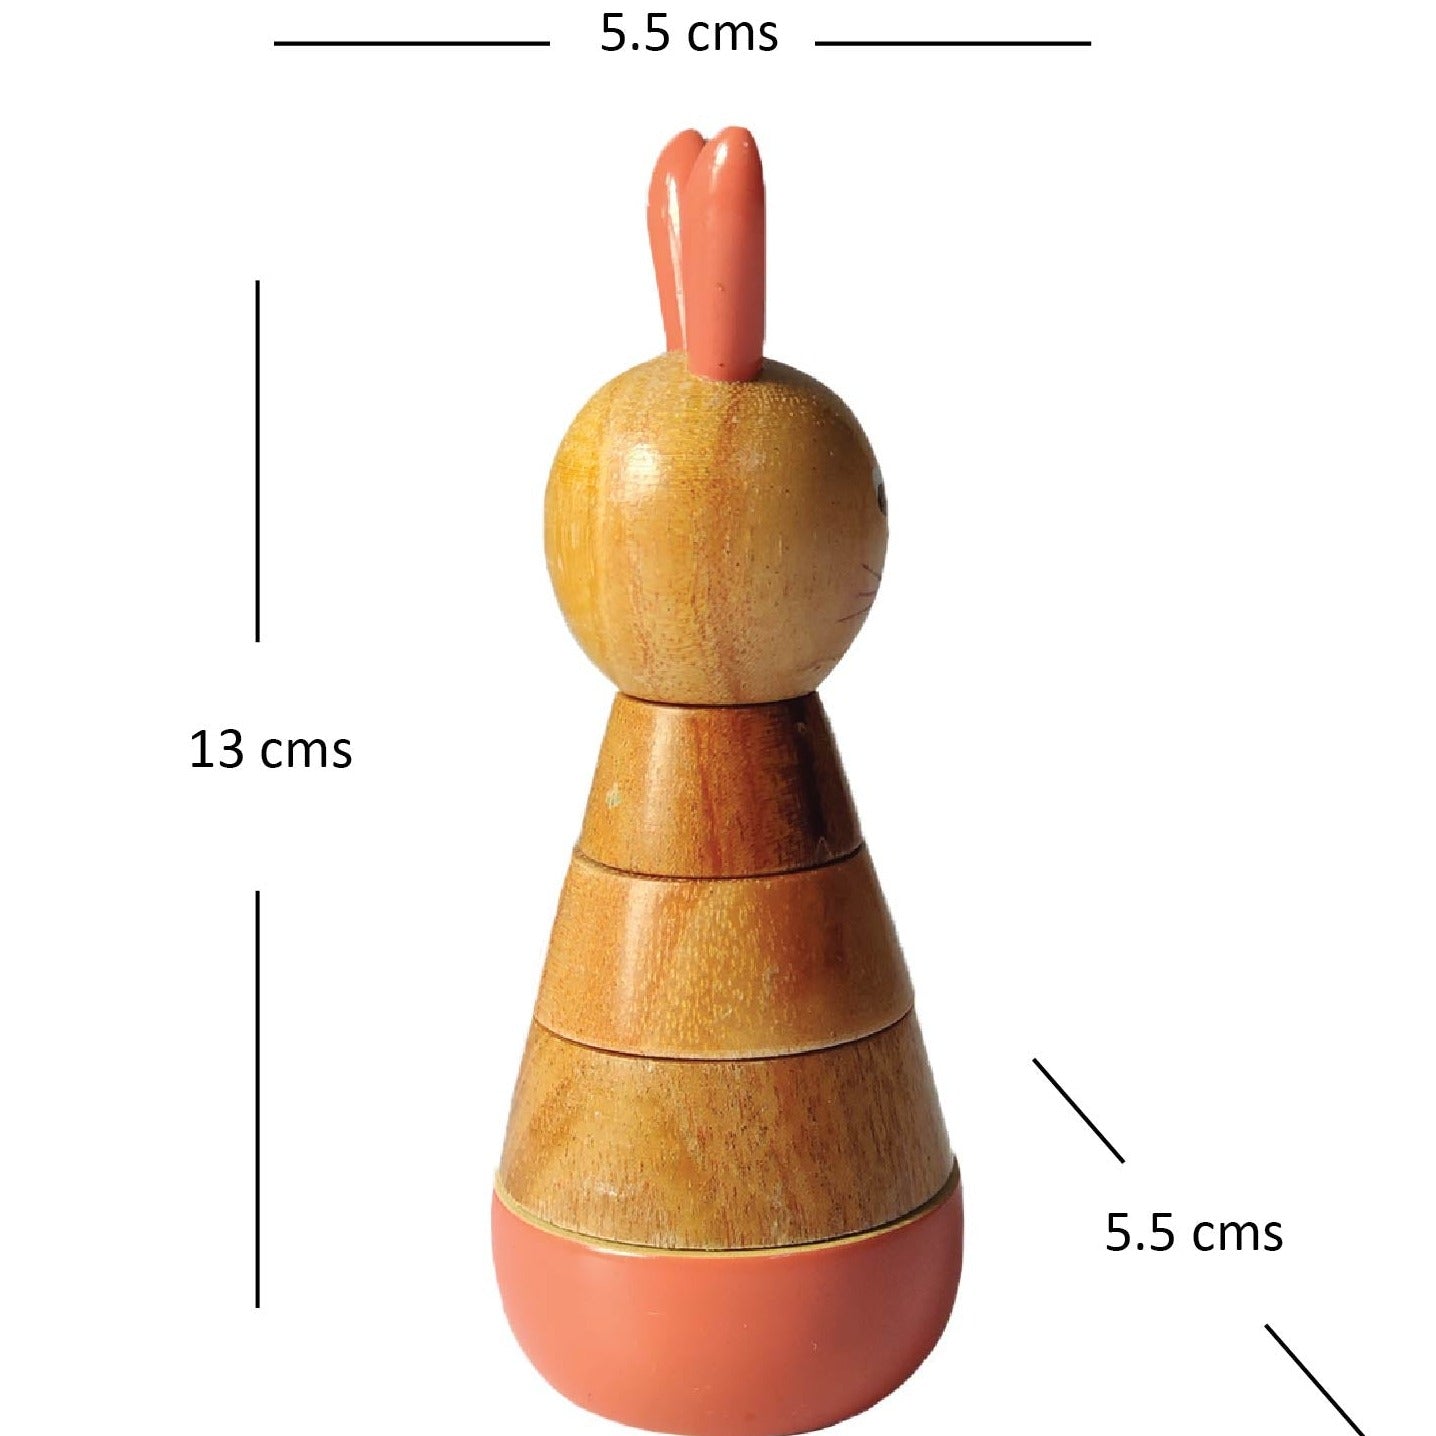 a wooden stacking toy with measurements for it